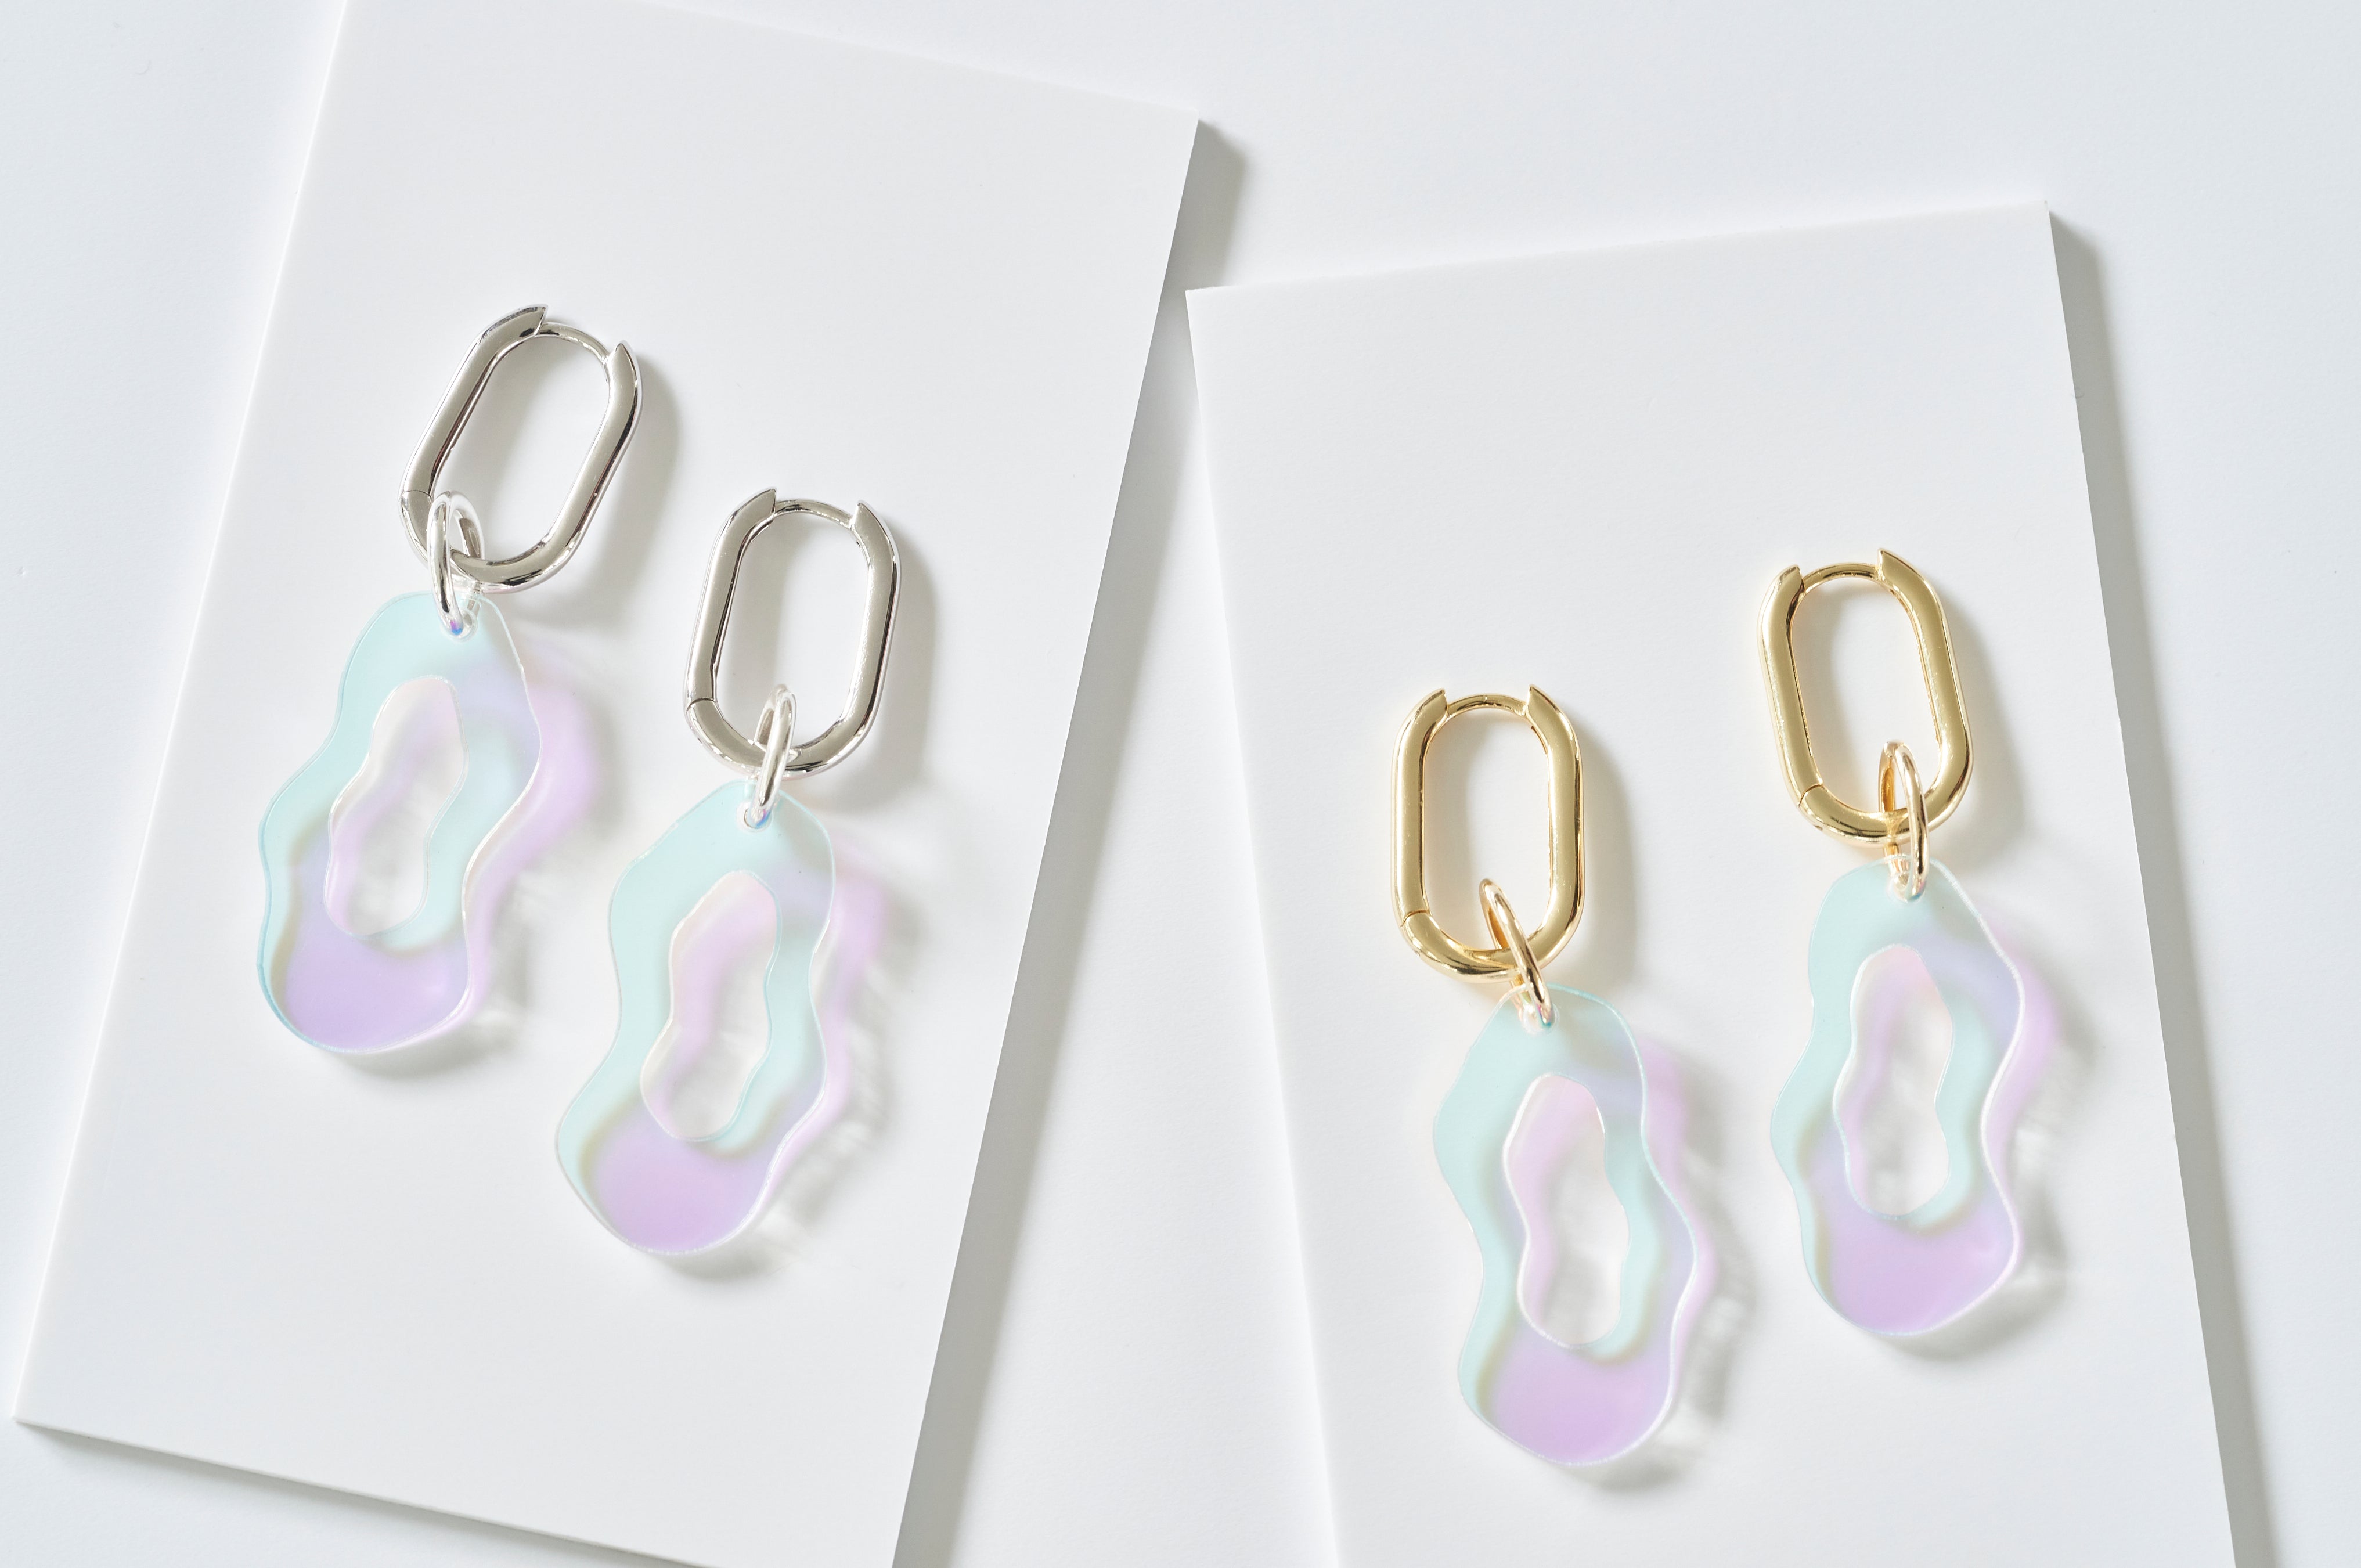 Gigi - iridescent with gold-plated hoops